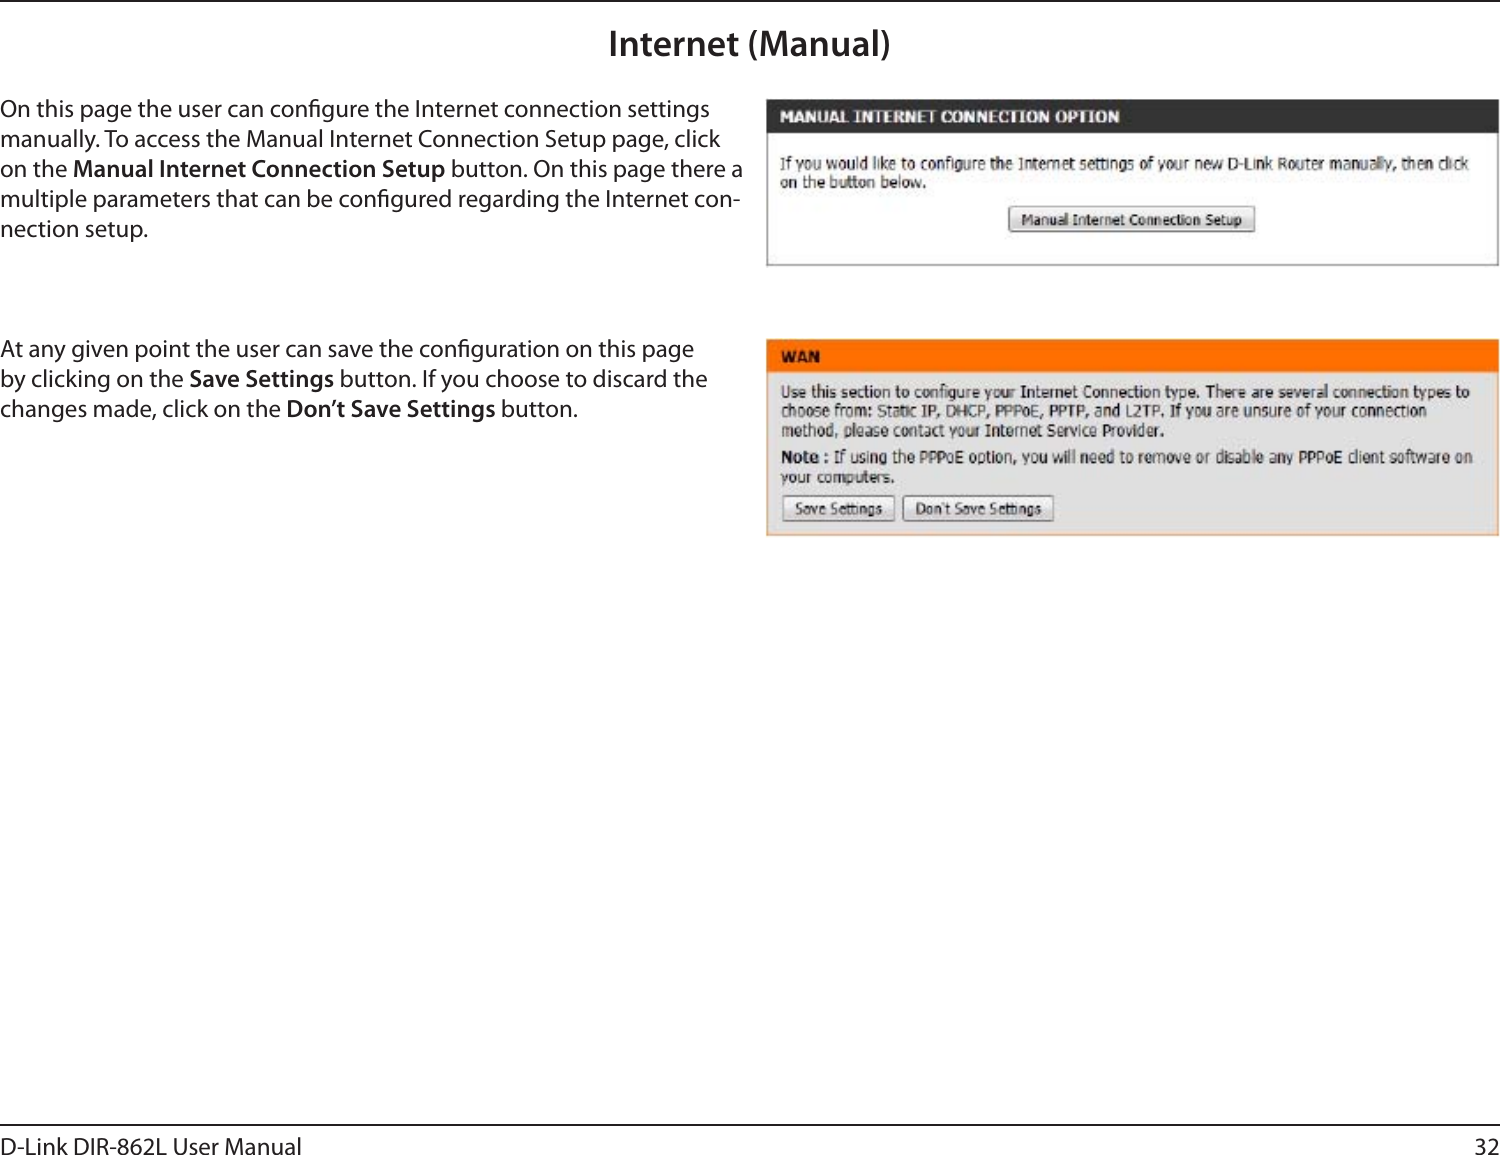 32D-Link DIR-862L User ManualInternet (Manual)On this page the user can congure the Internet connection settings manually. To access the Manual Internet Connection Setup page, click on the Manual Internet Connection Setup button. On this page there a multiple parameters that can be congured regarding the Internet con-nection setup.At any given point the user can save the conguration on this page by clicking on the Save Settings button. If you choose to discard the changes made, click on the Don’t Save Settings button.